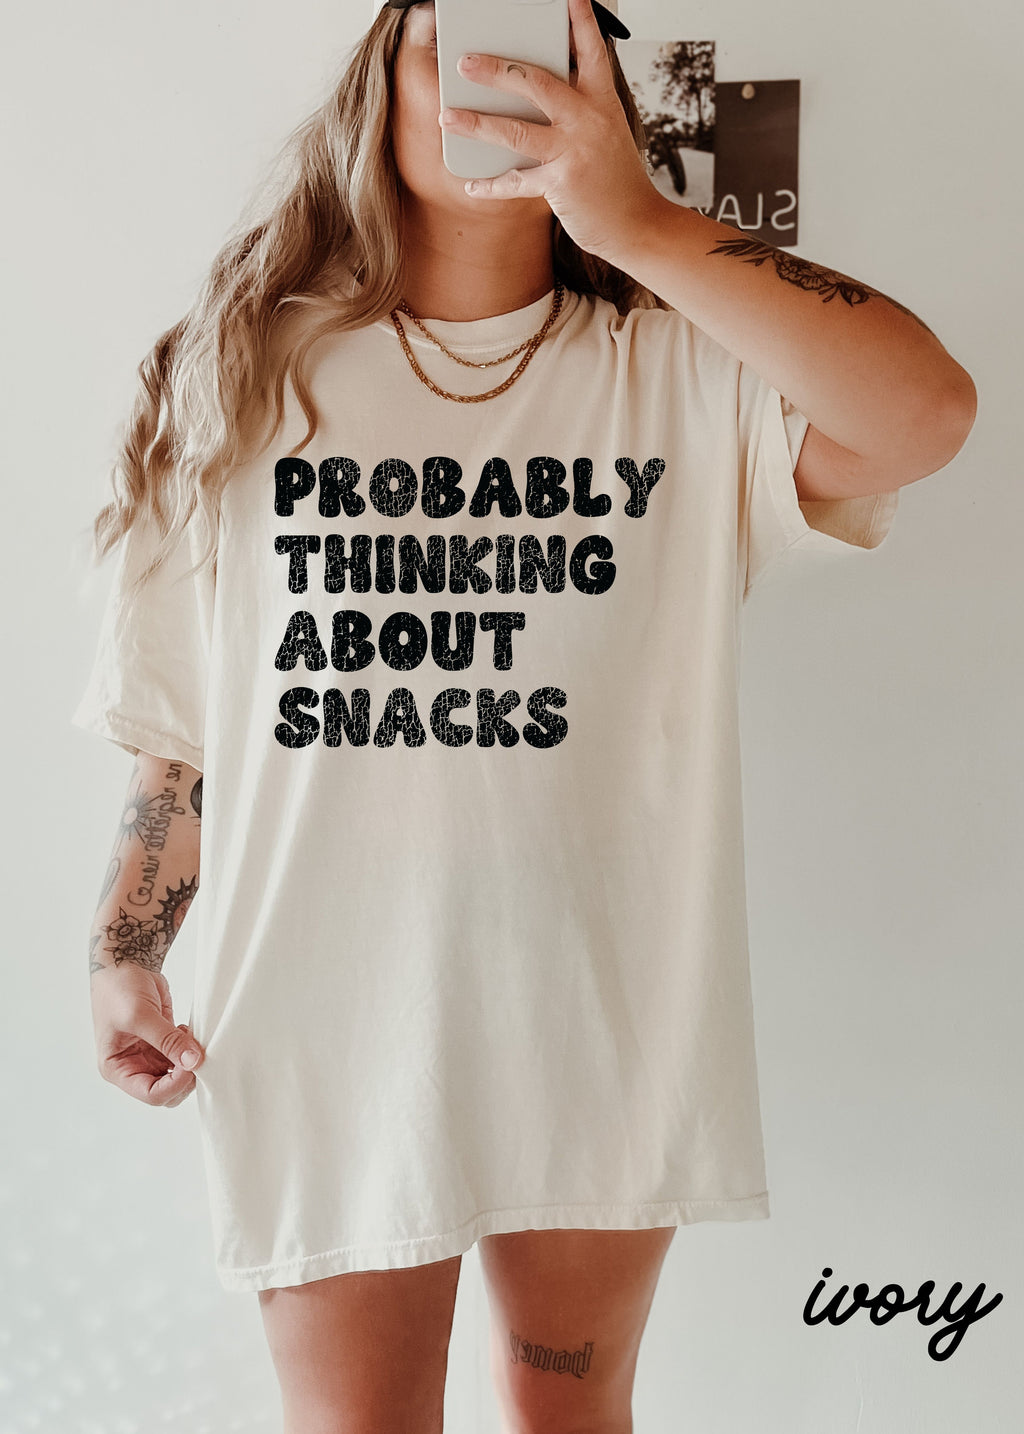 *Thinking About Snacks Tee *6 Colors (S-3X) Comfort Colors